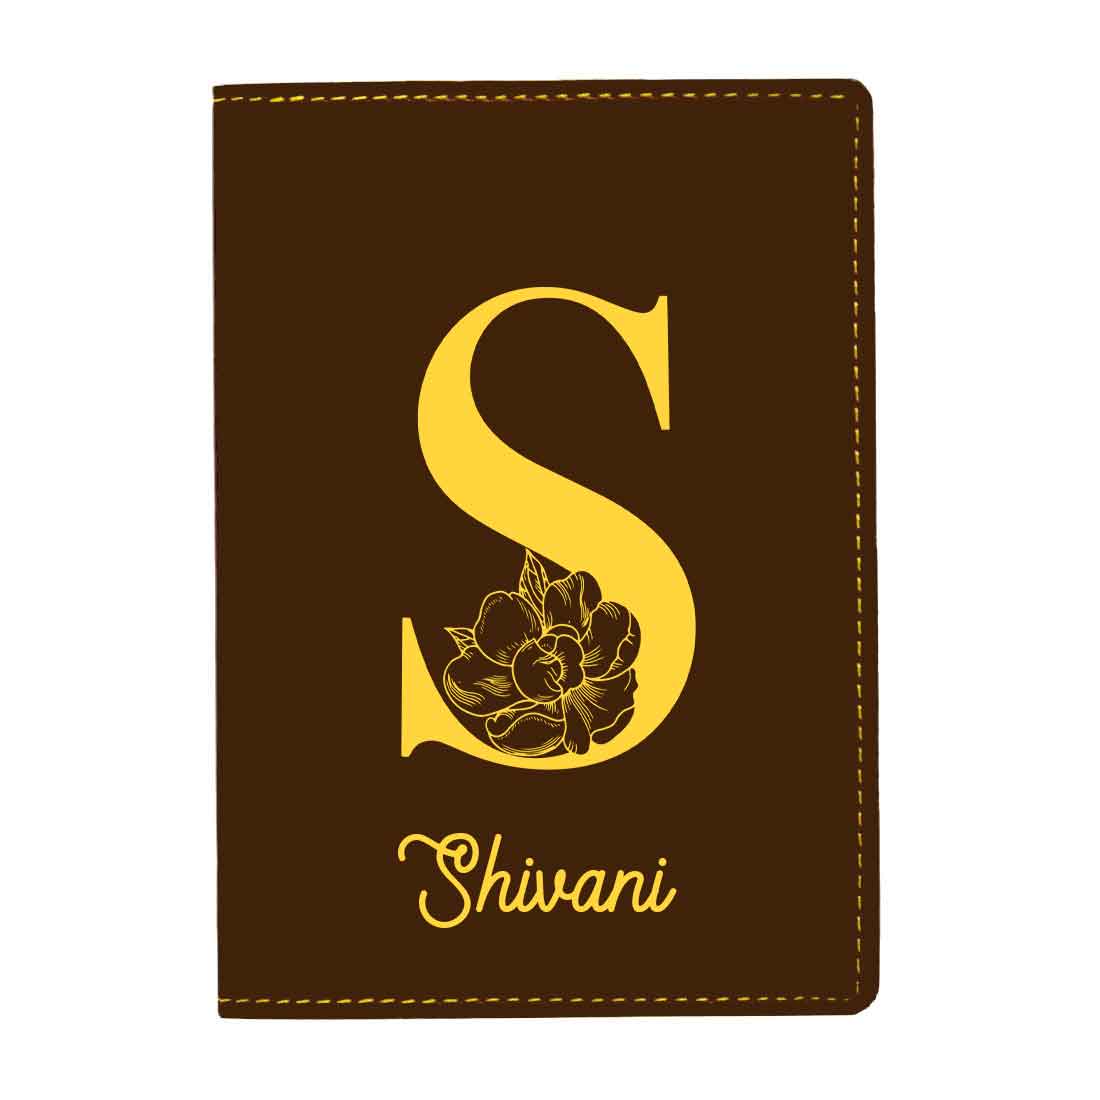 Custom Name on Passport Cover Holder Faux Leather Covers for Passports - Initial Name